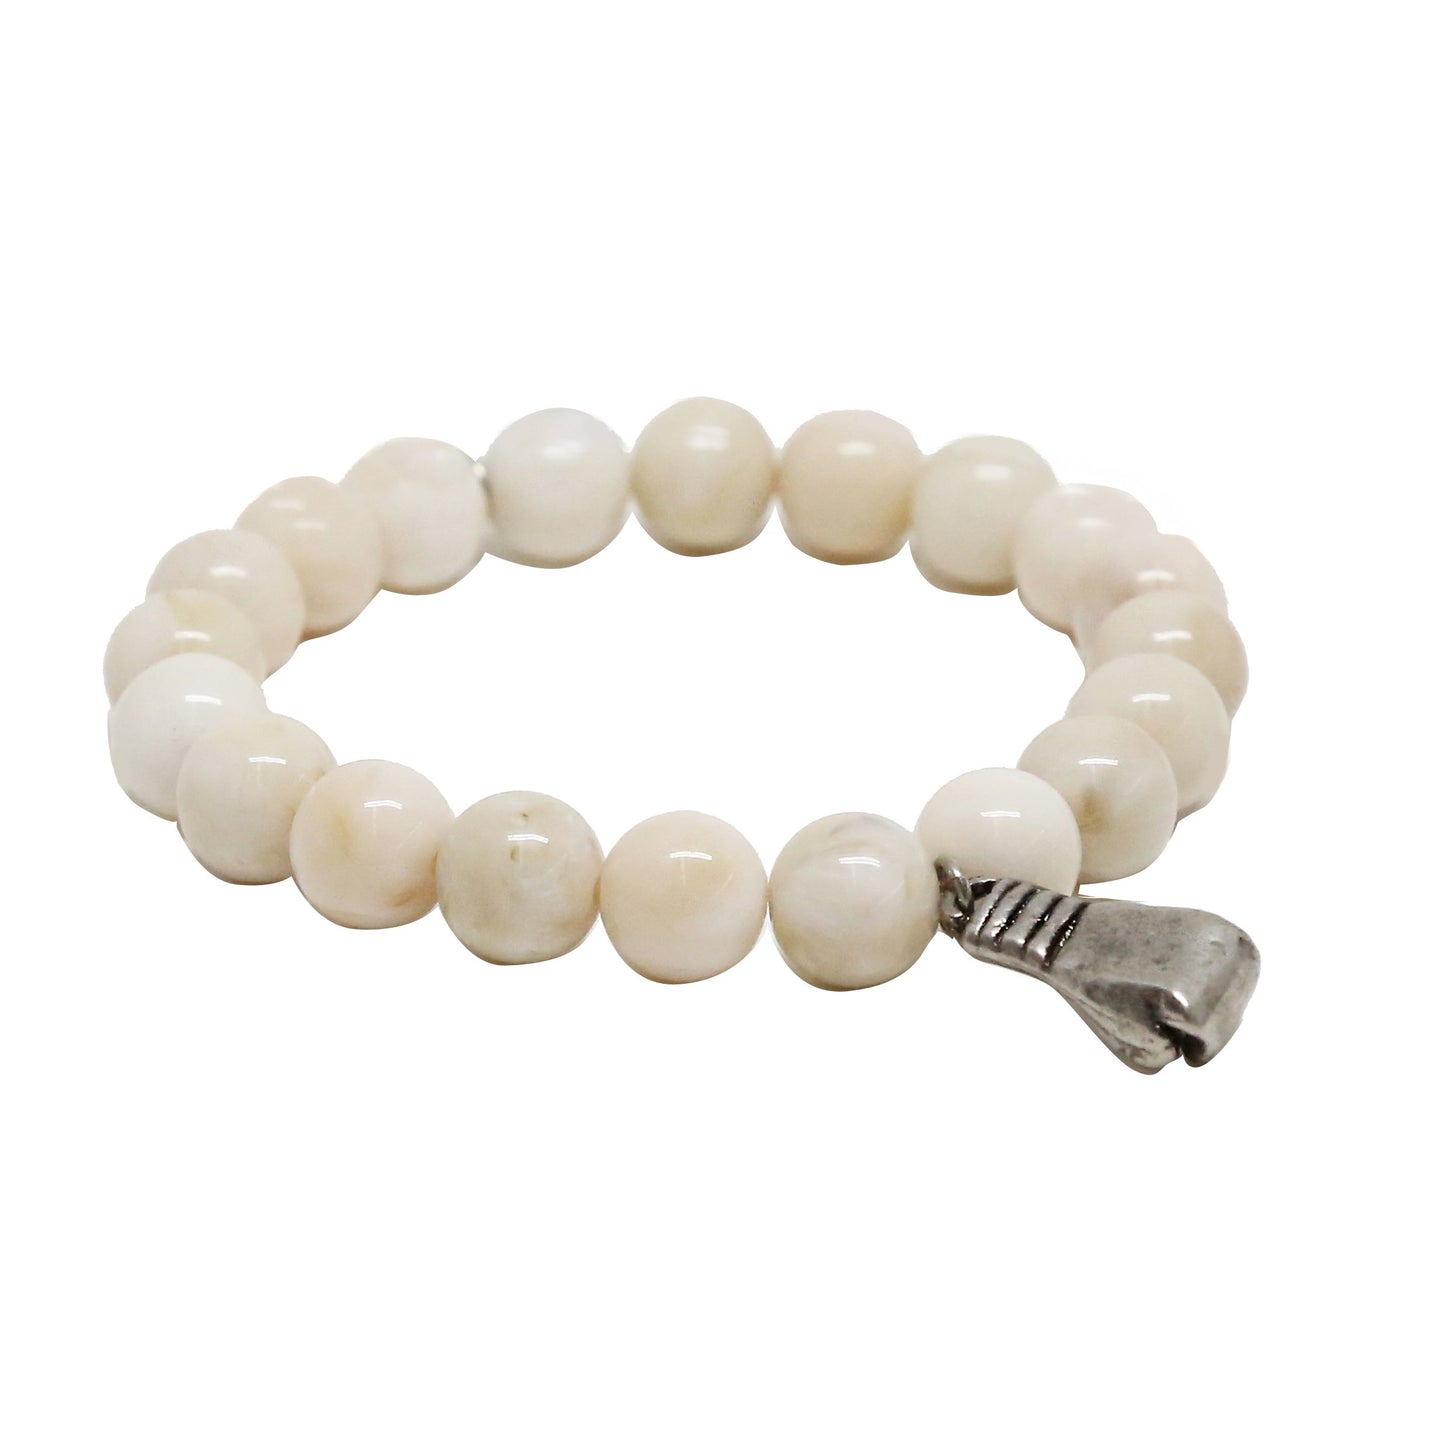 From Dusk 'til Day Bracelet in White and Silver Ox